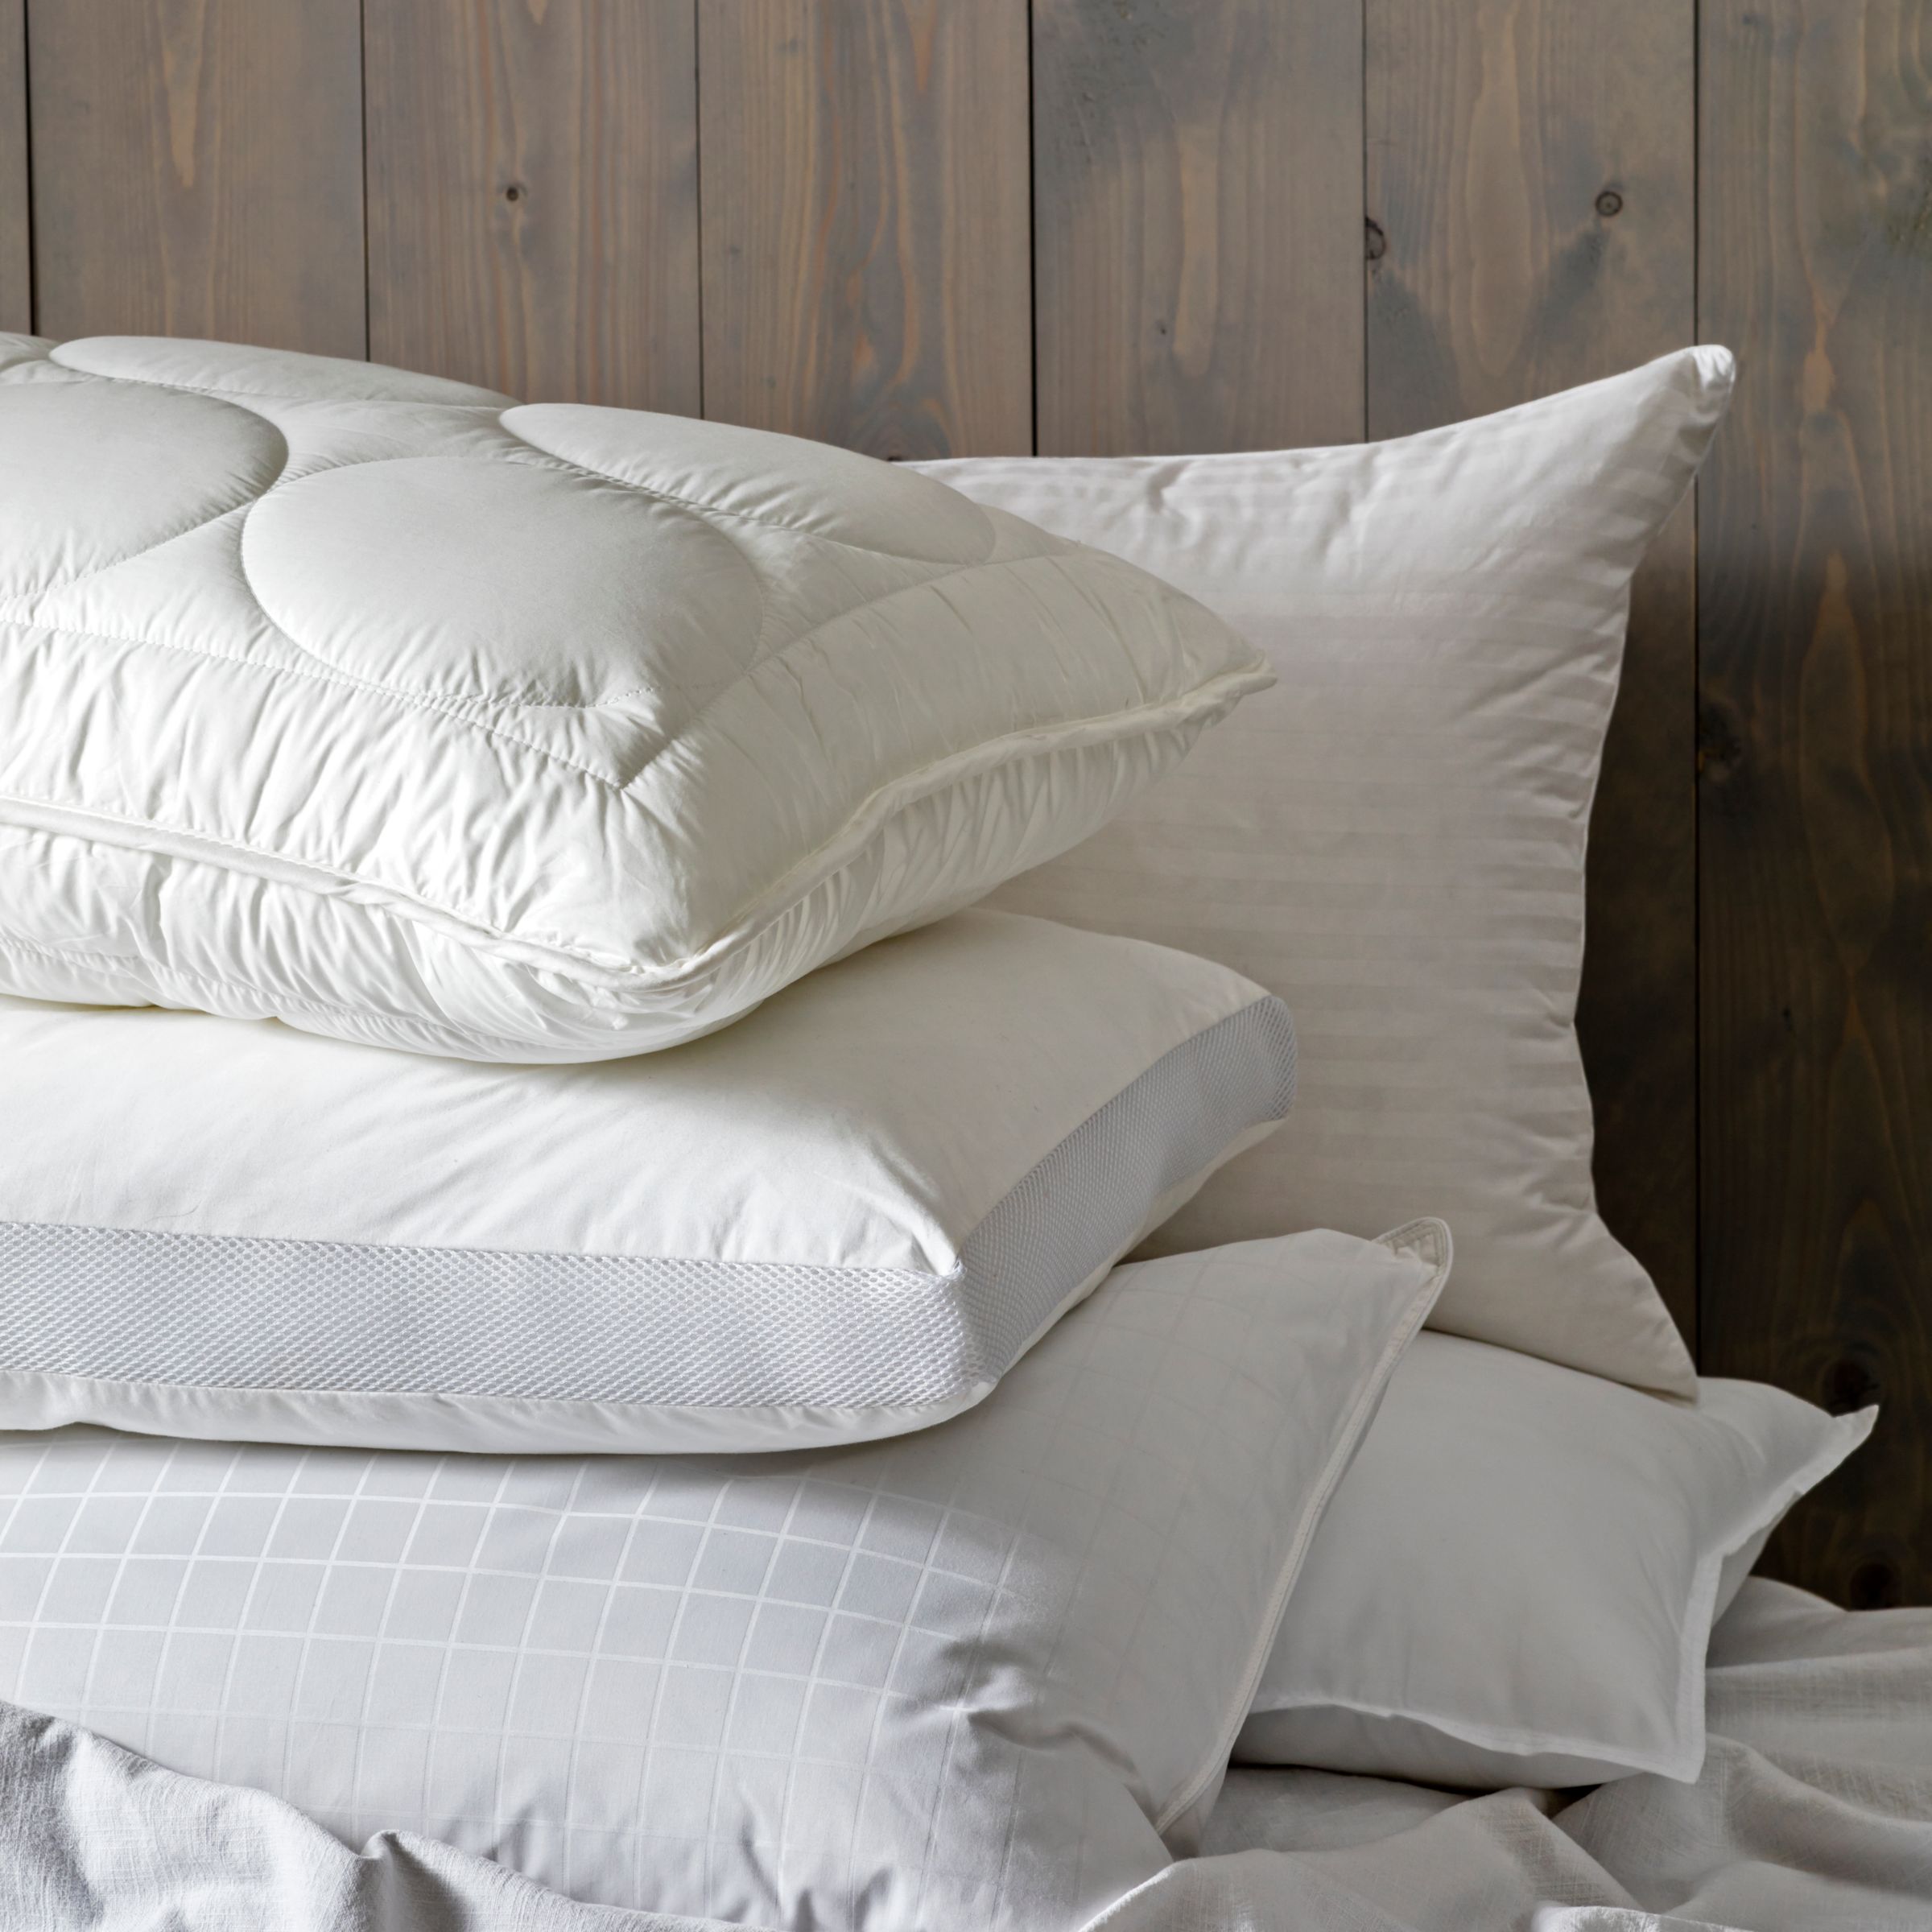 This John Lewis pillow is comfortable and surprisingly affordable